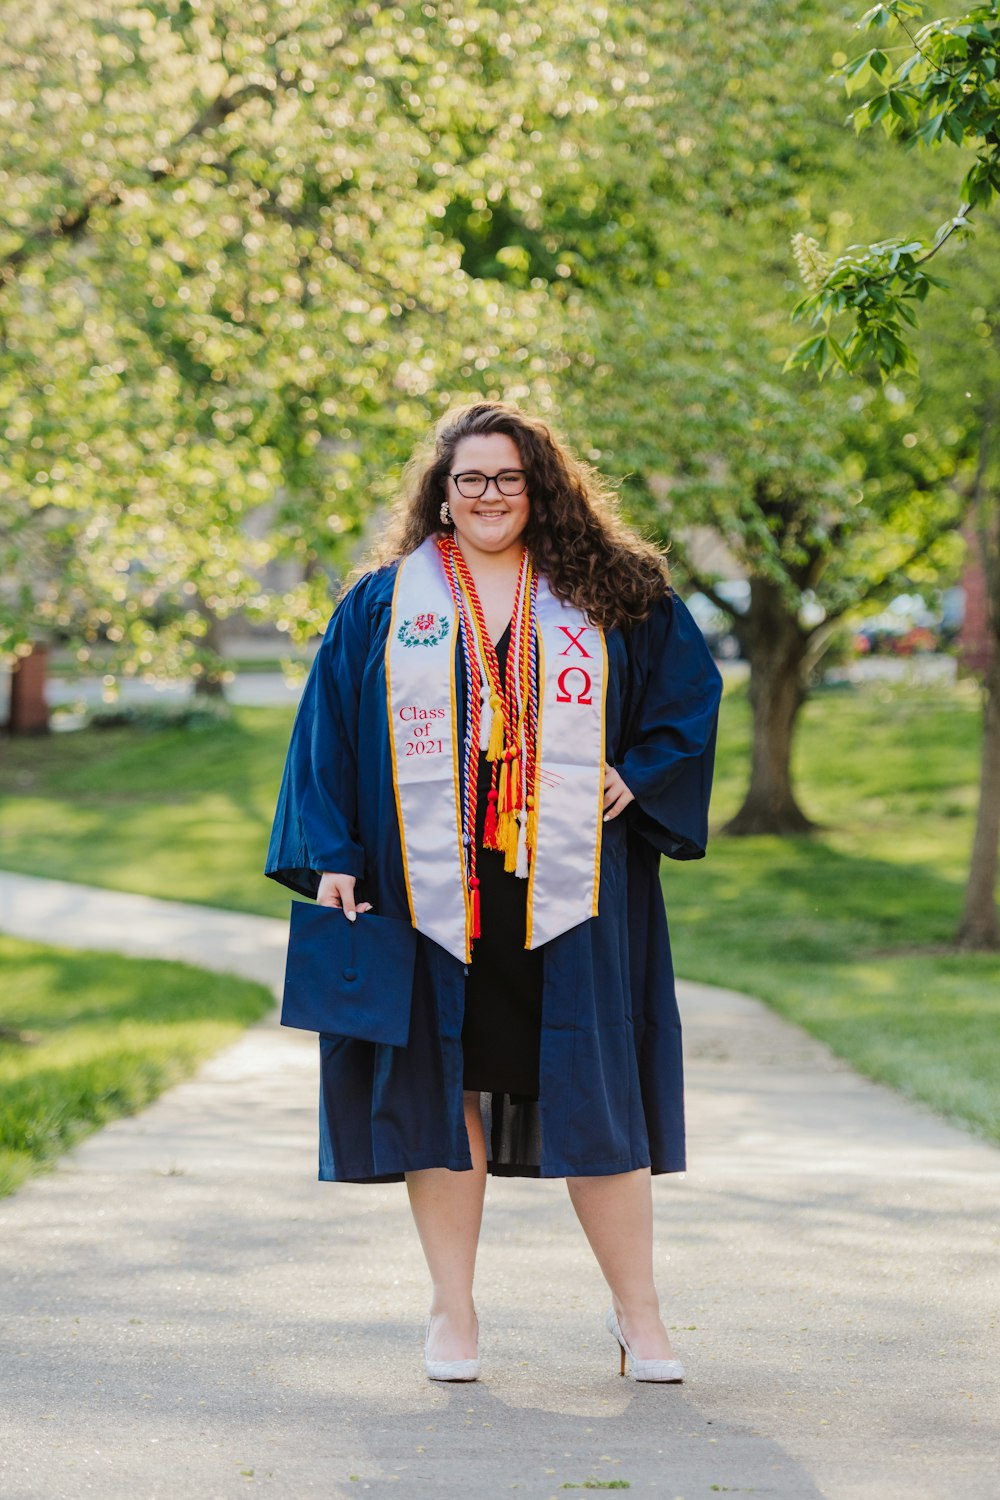 woman in blue academic dress standing on road during daytime